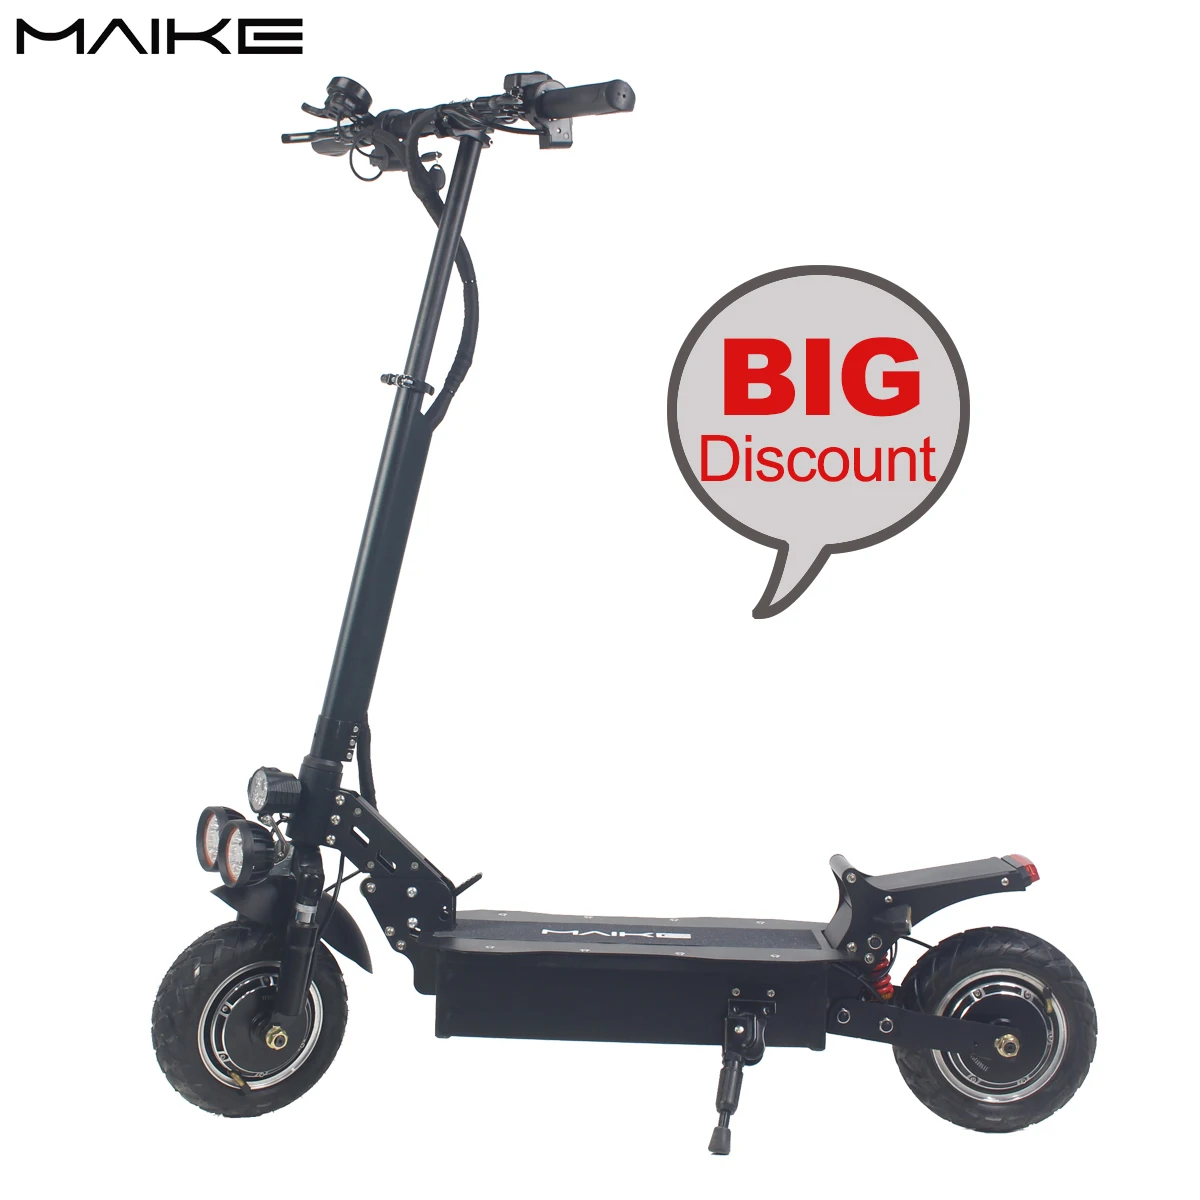 Maike 10 inch tire Mk6 2000w scooter electric 70 km/h fast escooters for adults